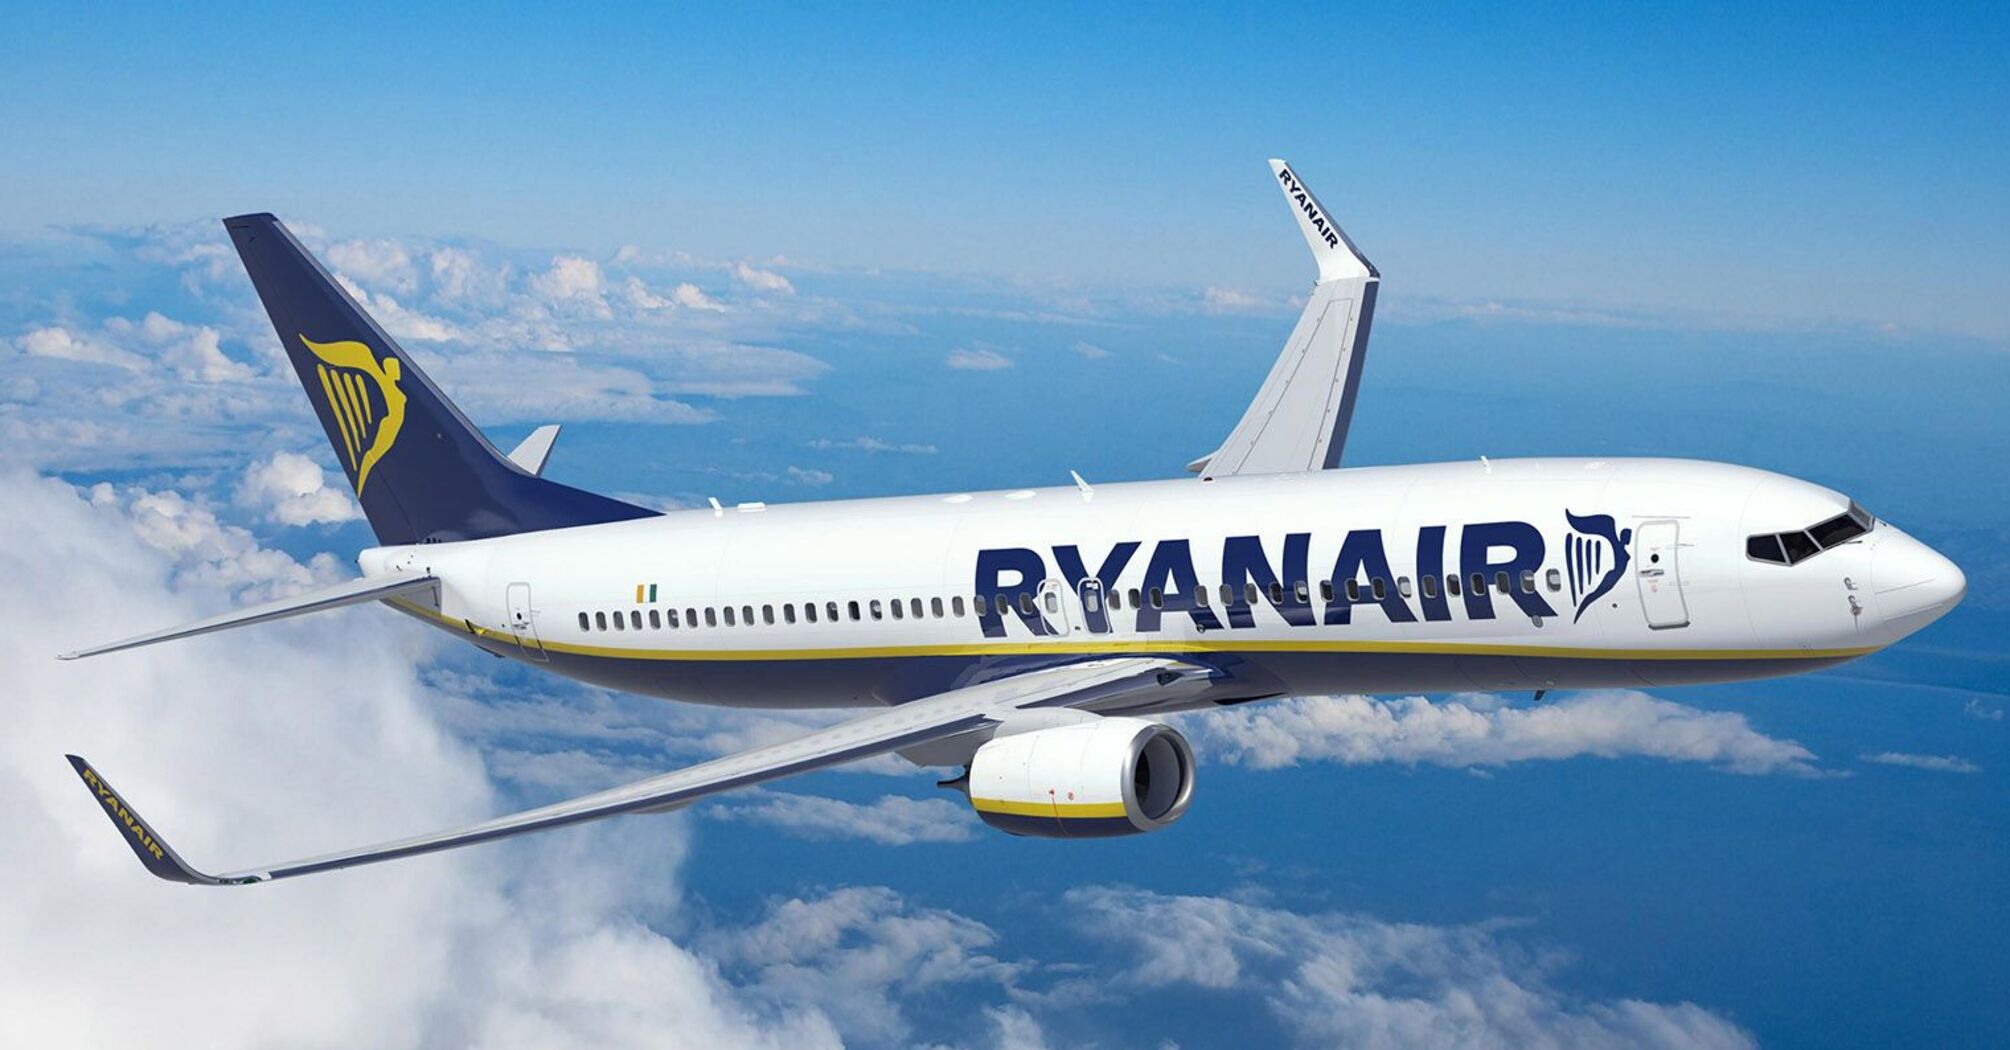 How to save on flights with Ryanair and avoid unnecessary costs: 25 tips